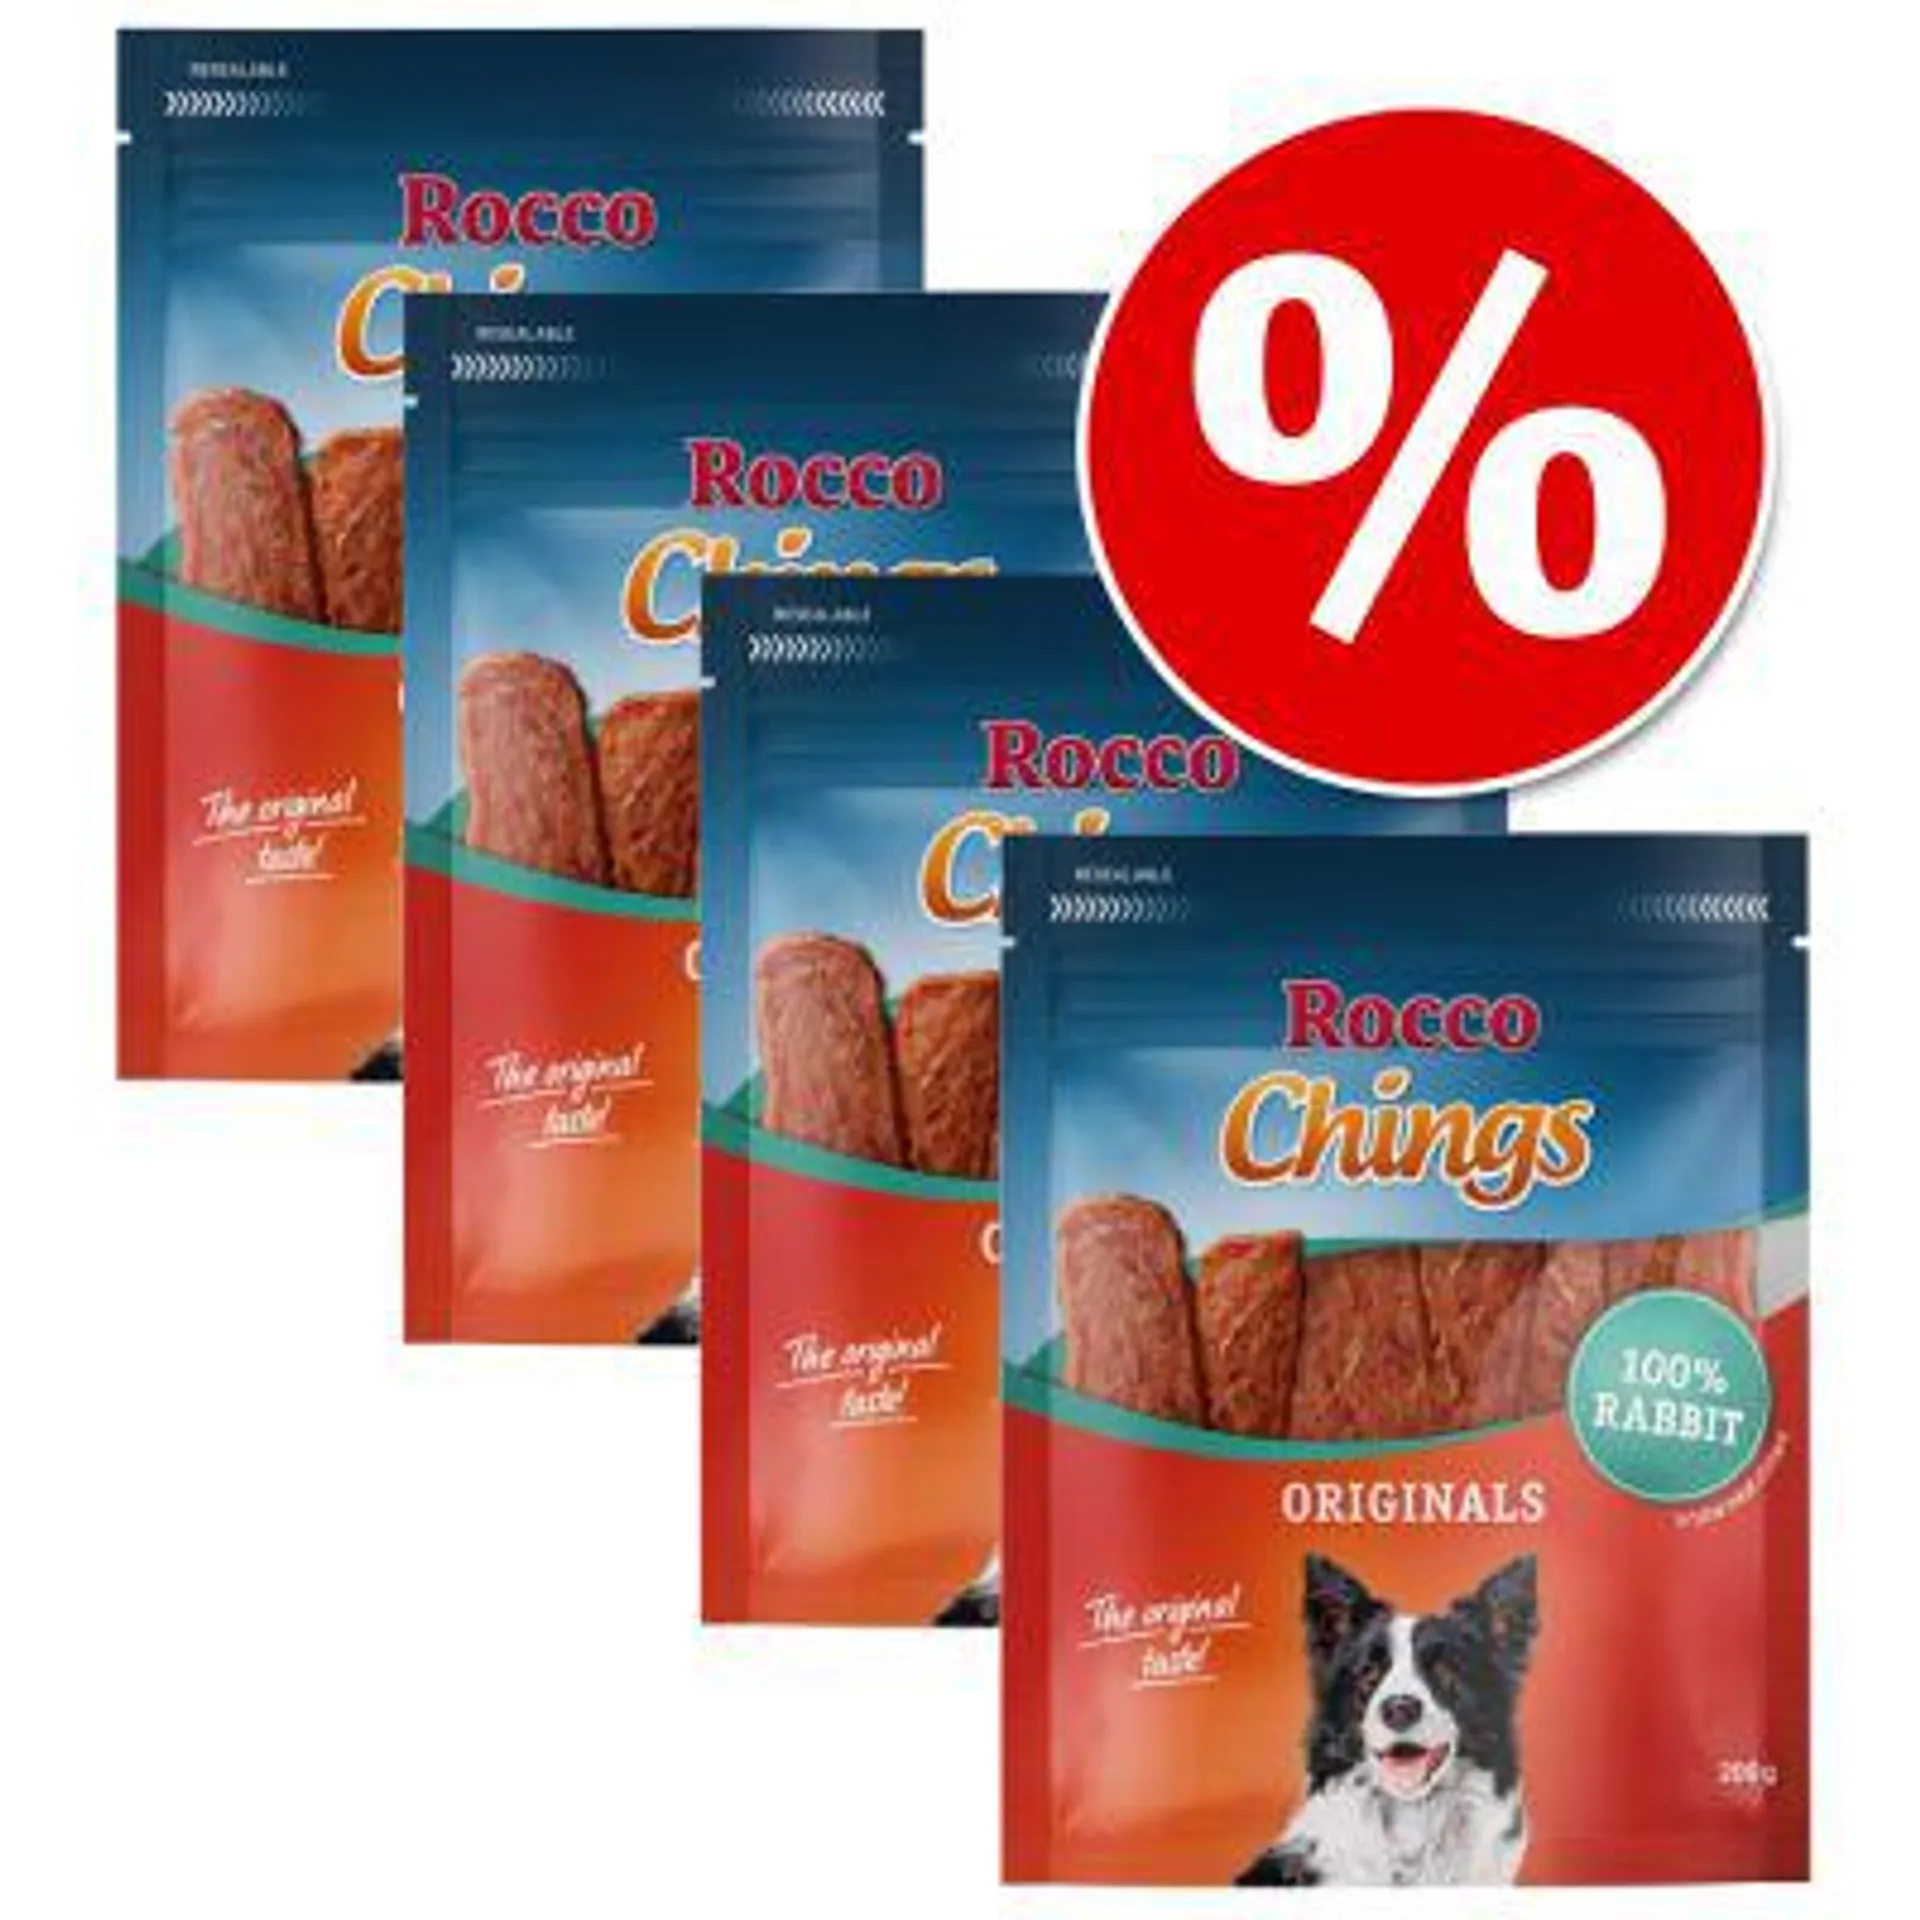 4 x Rocco Chings Originals Dog Chews - Special Price!*